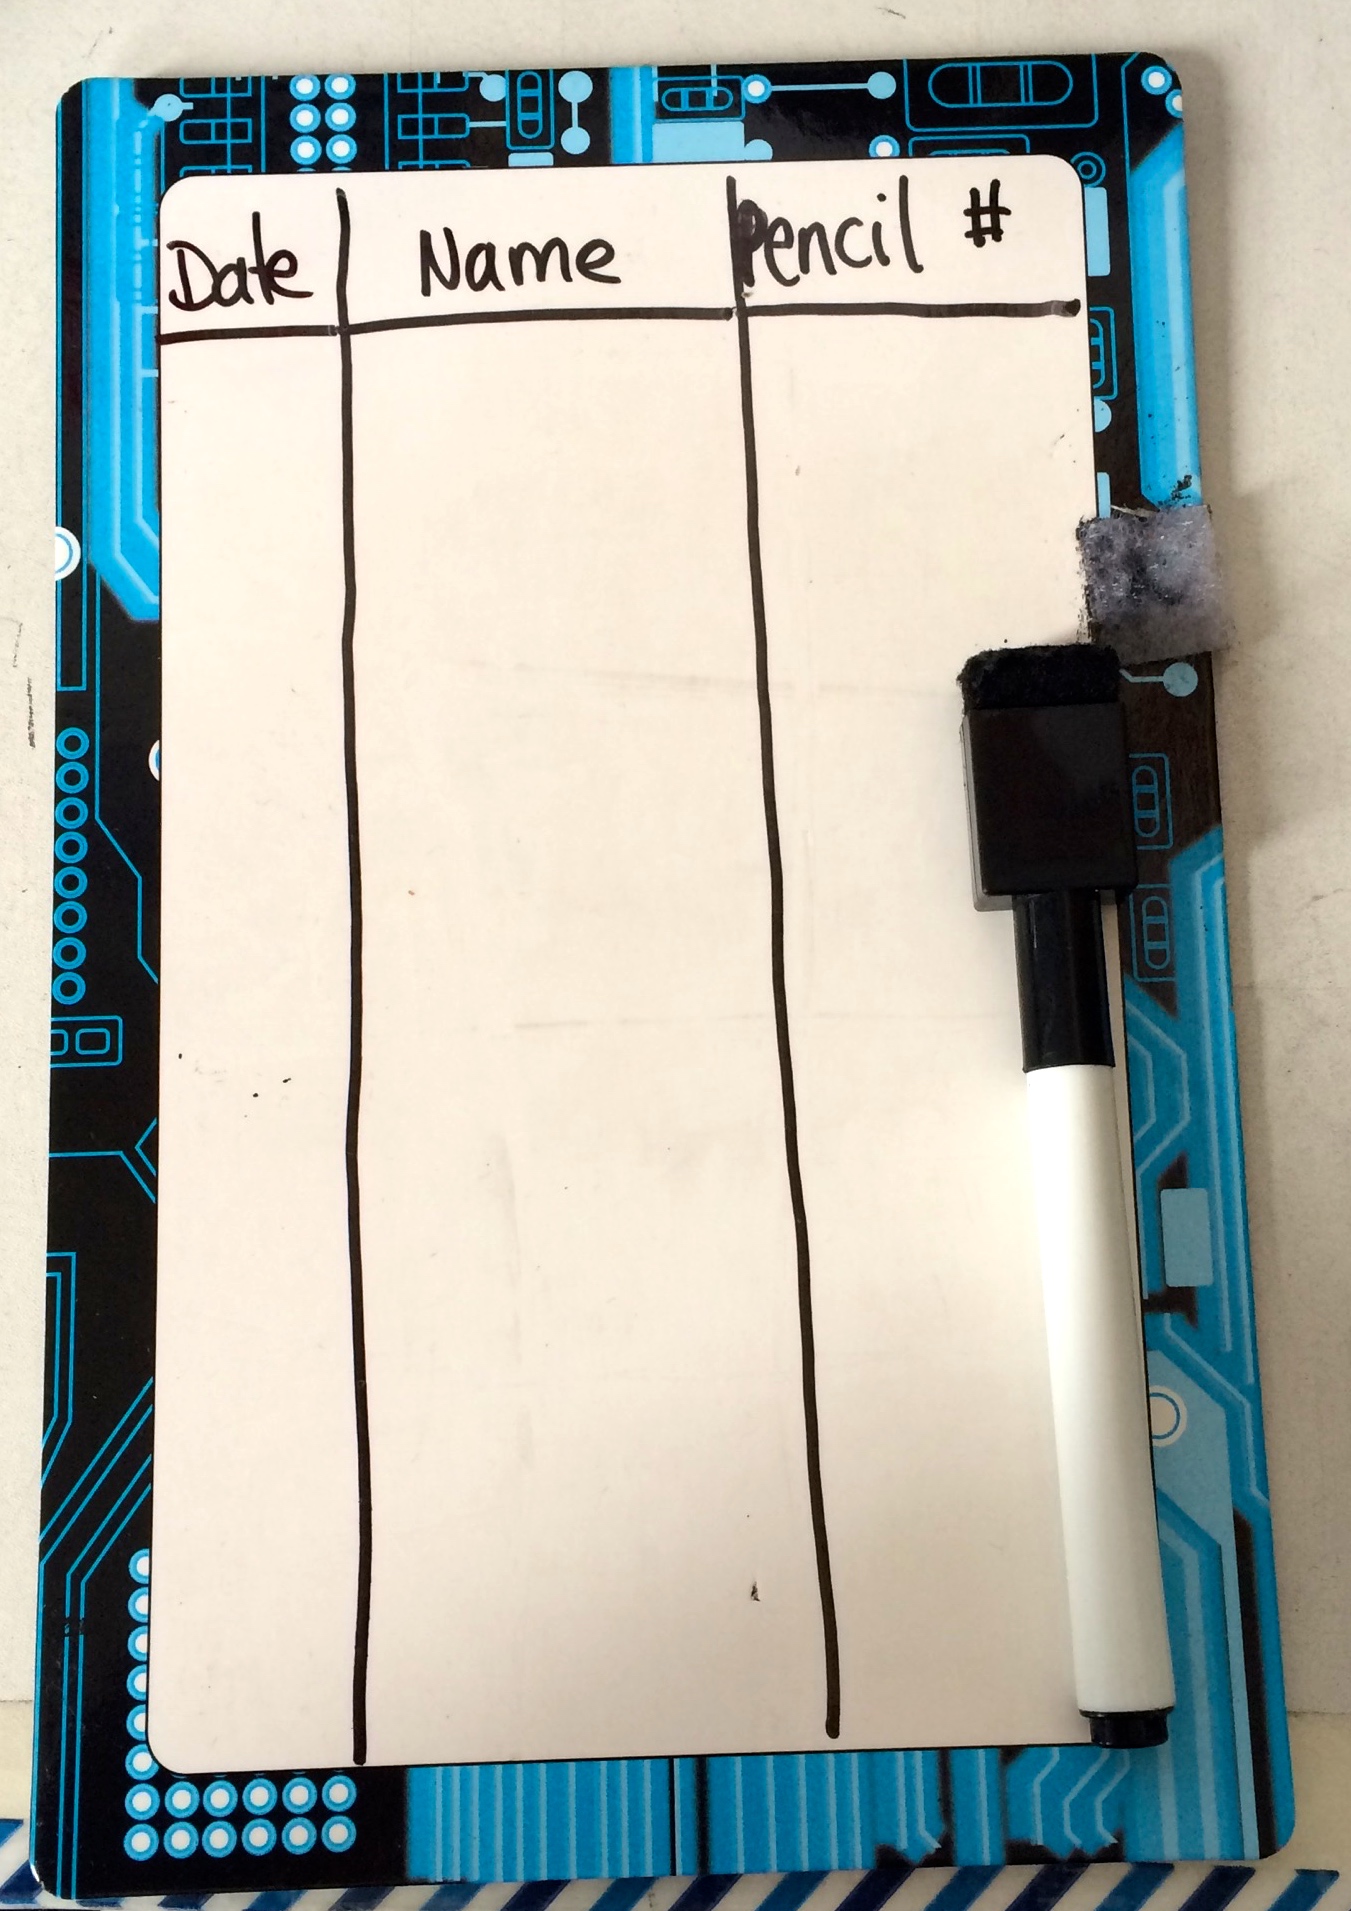 A small erasable board with an attached pen serves as a pencil check-out system.